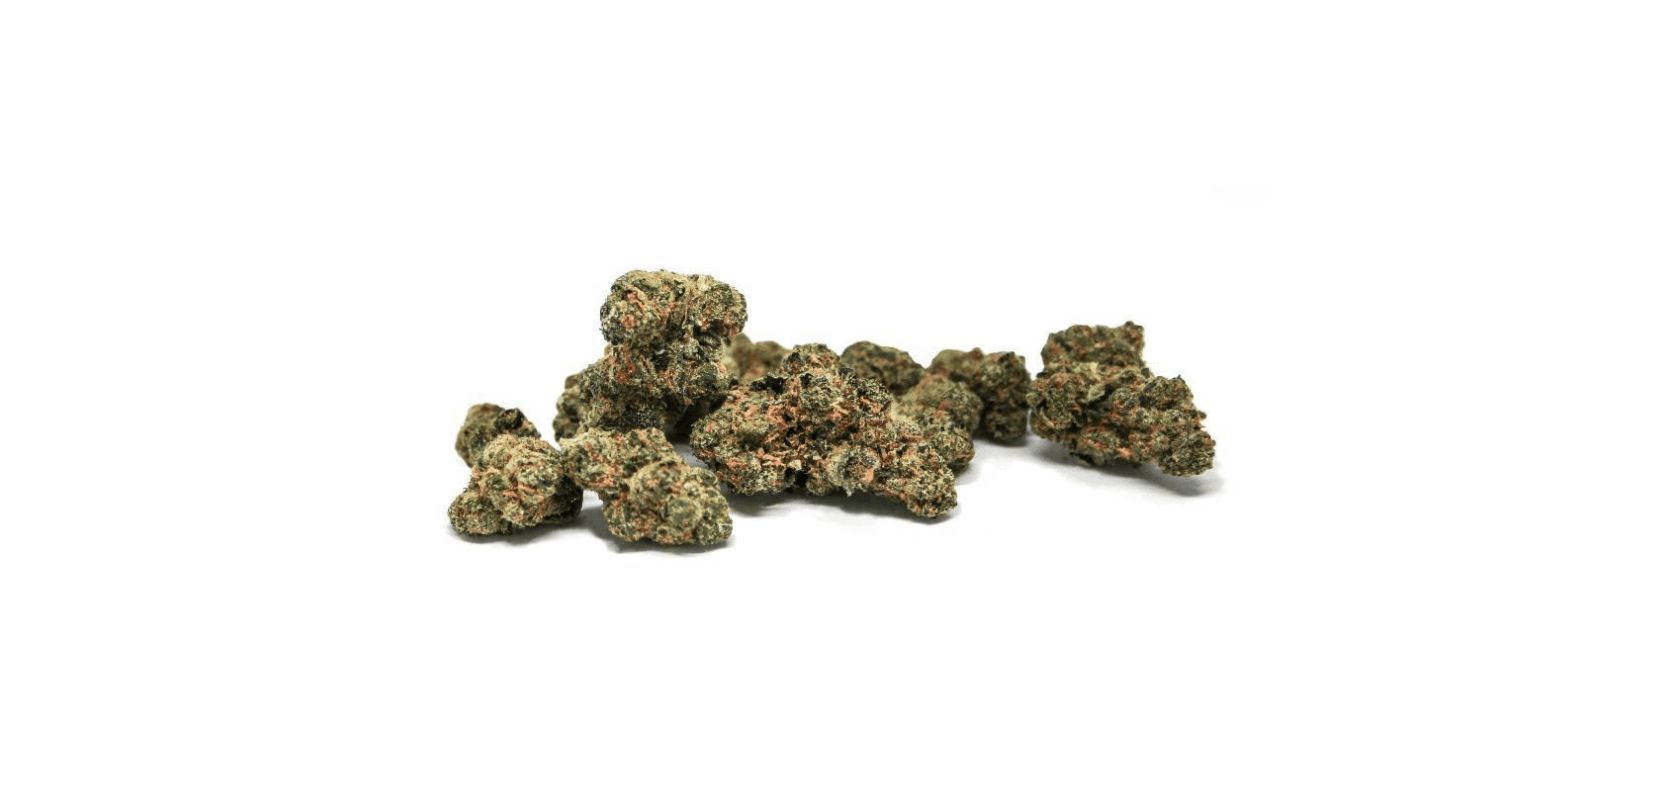 By opting to buy weed online, you get access to a wider variety, competitive prices, and detailed product descriptions. 